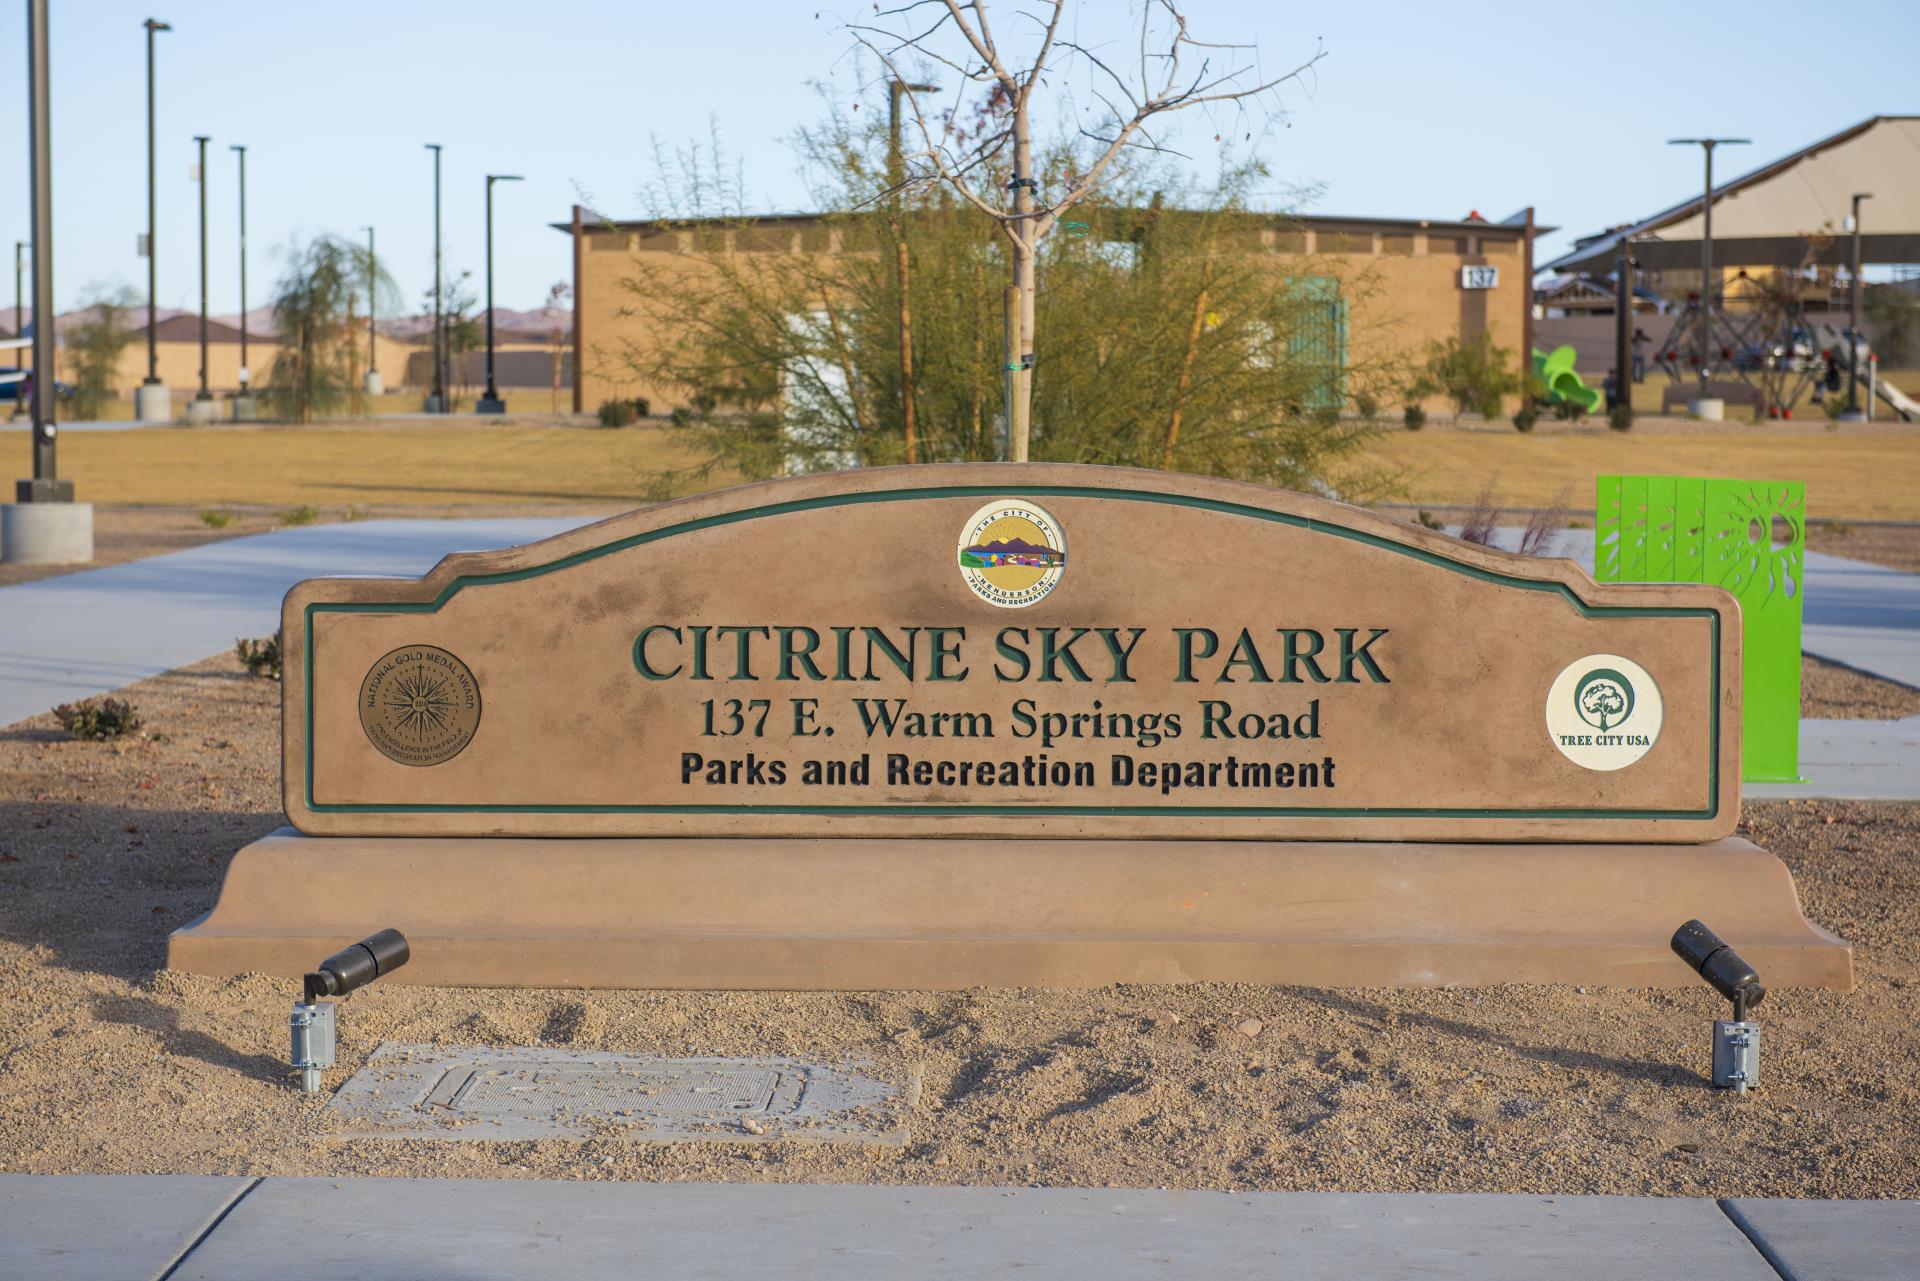 Beauty Shot of the Citrine Sky Park Front Sign